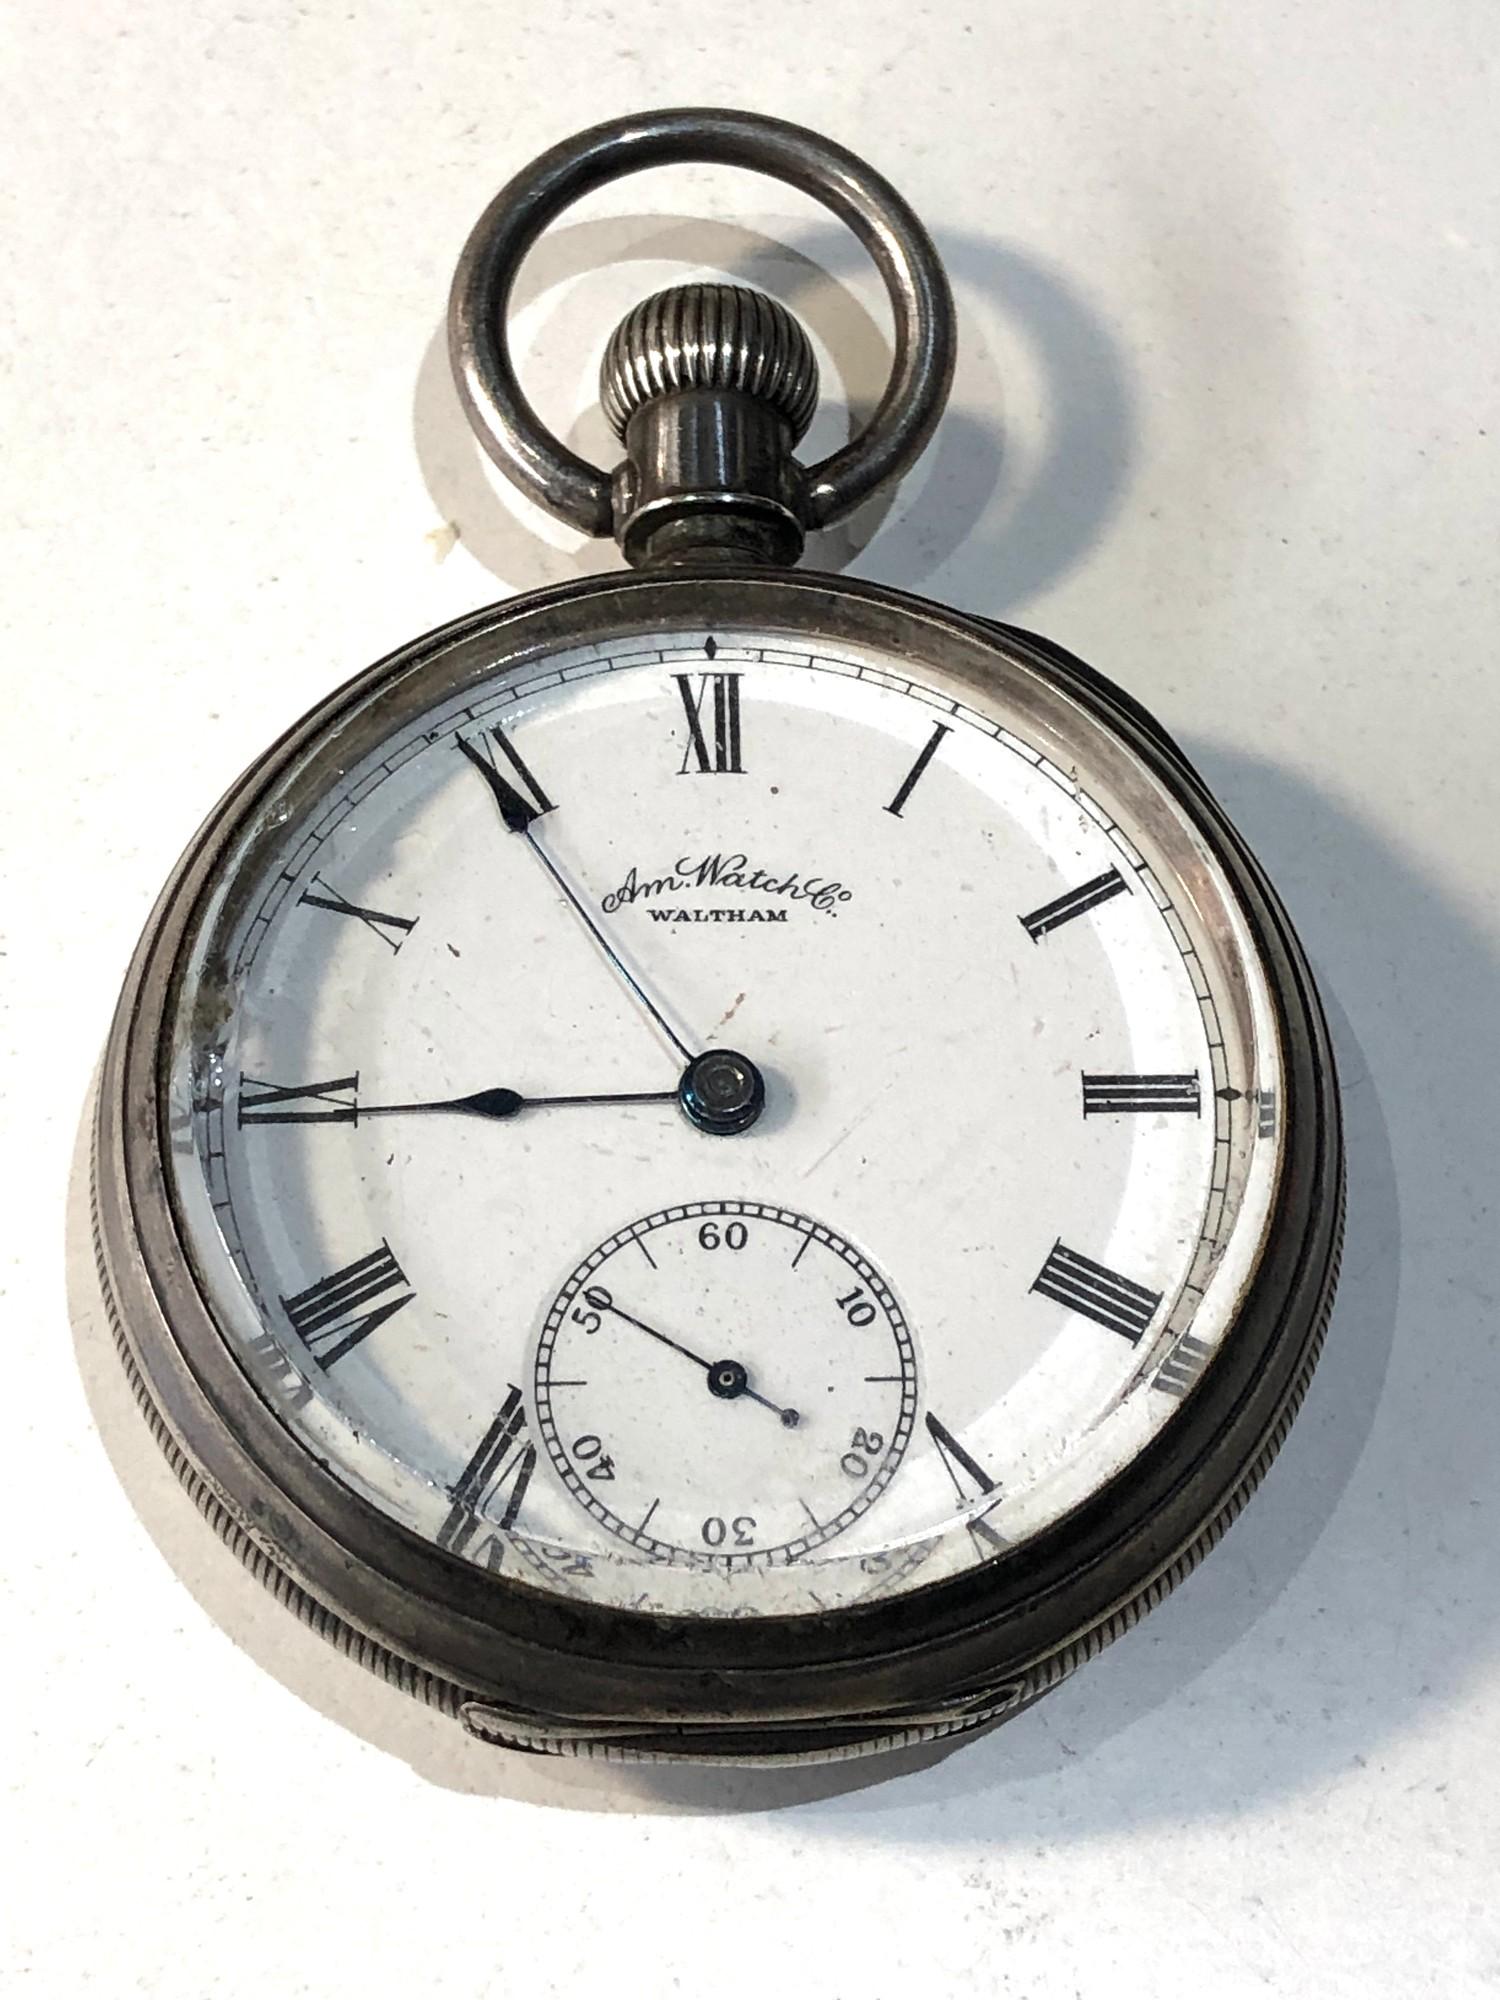 Antique silver cased Am watch Co waltham pocket watch balance will spin does not tick keeps